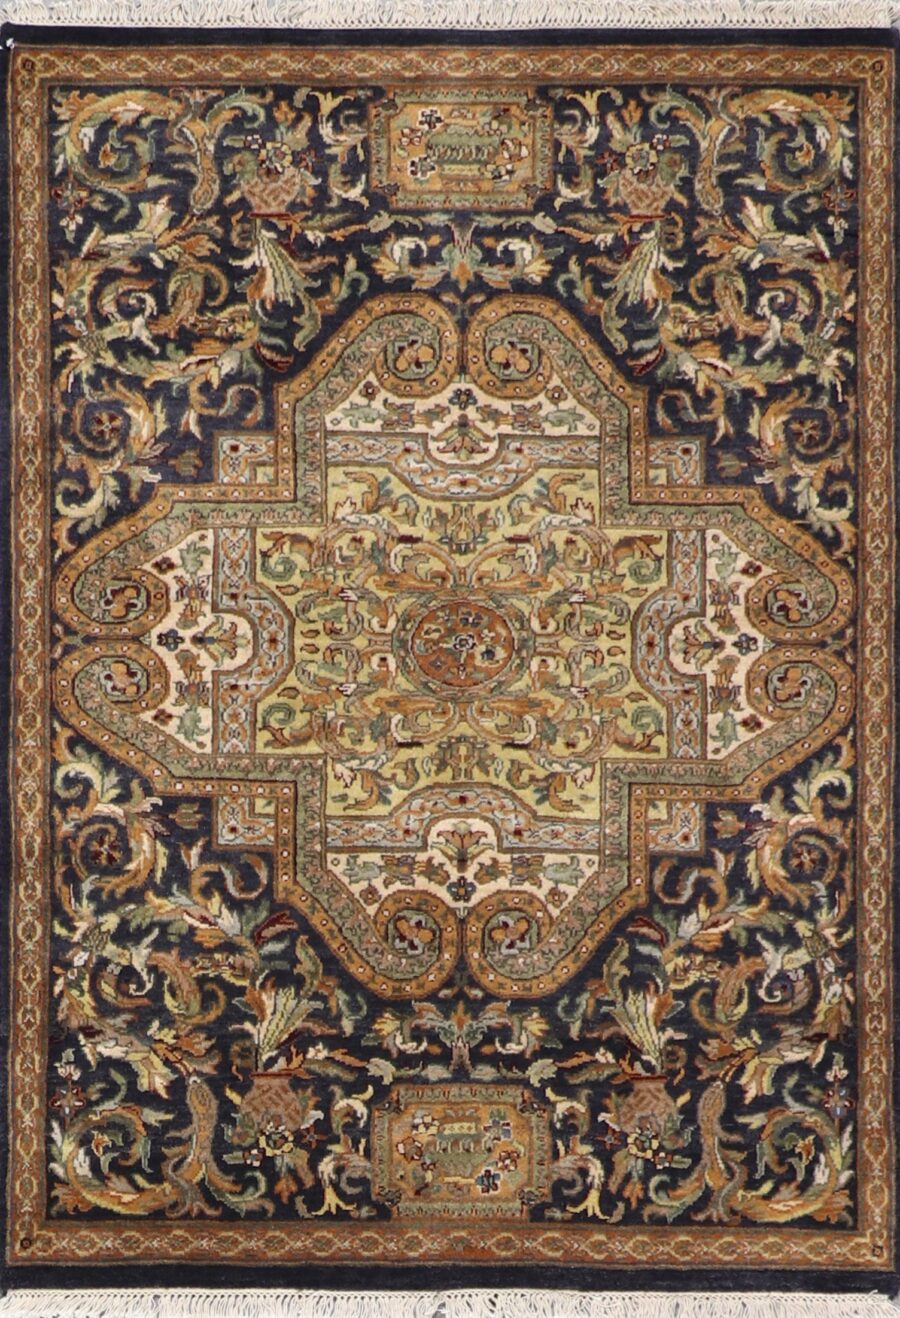 4’1”x5’10” Decorative Versace Black Charcoal Wool Hand-Knotted Rug - Direct Rug Import | Rugs in Chicago, Indiana,South Bend,Granger